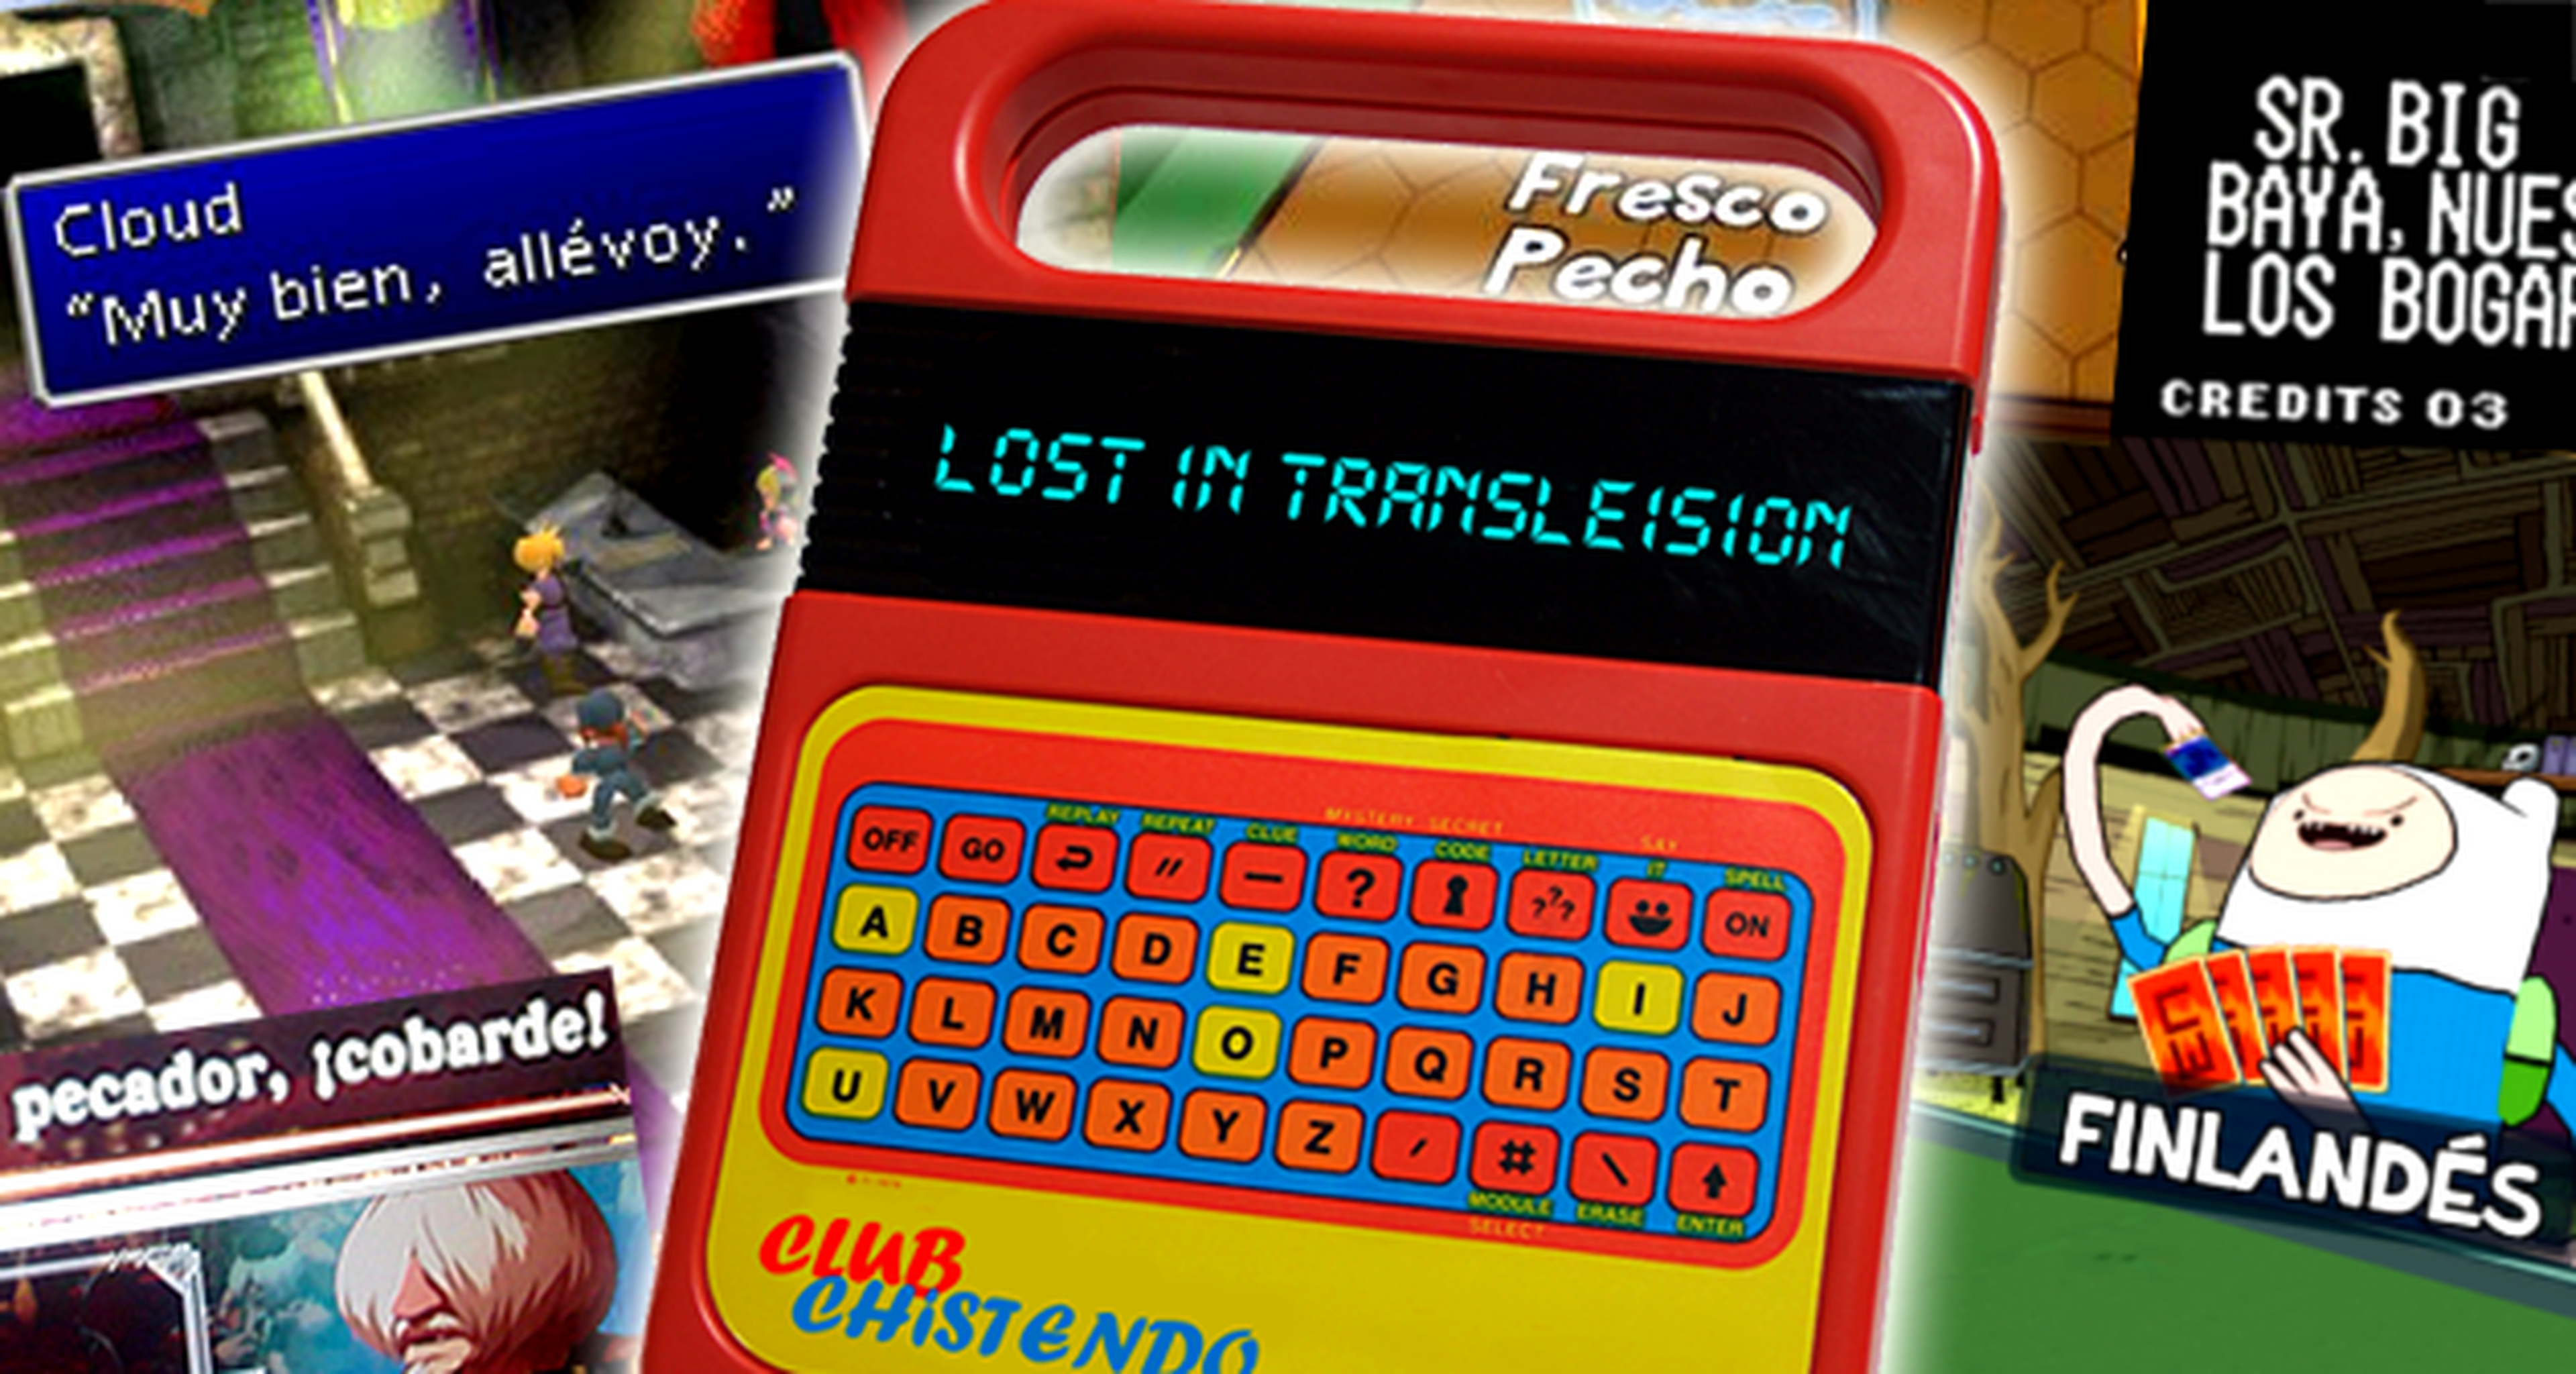 Club Chistendo: Lost in Transléision